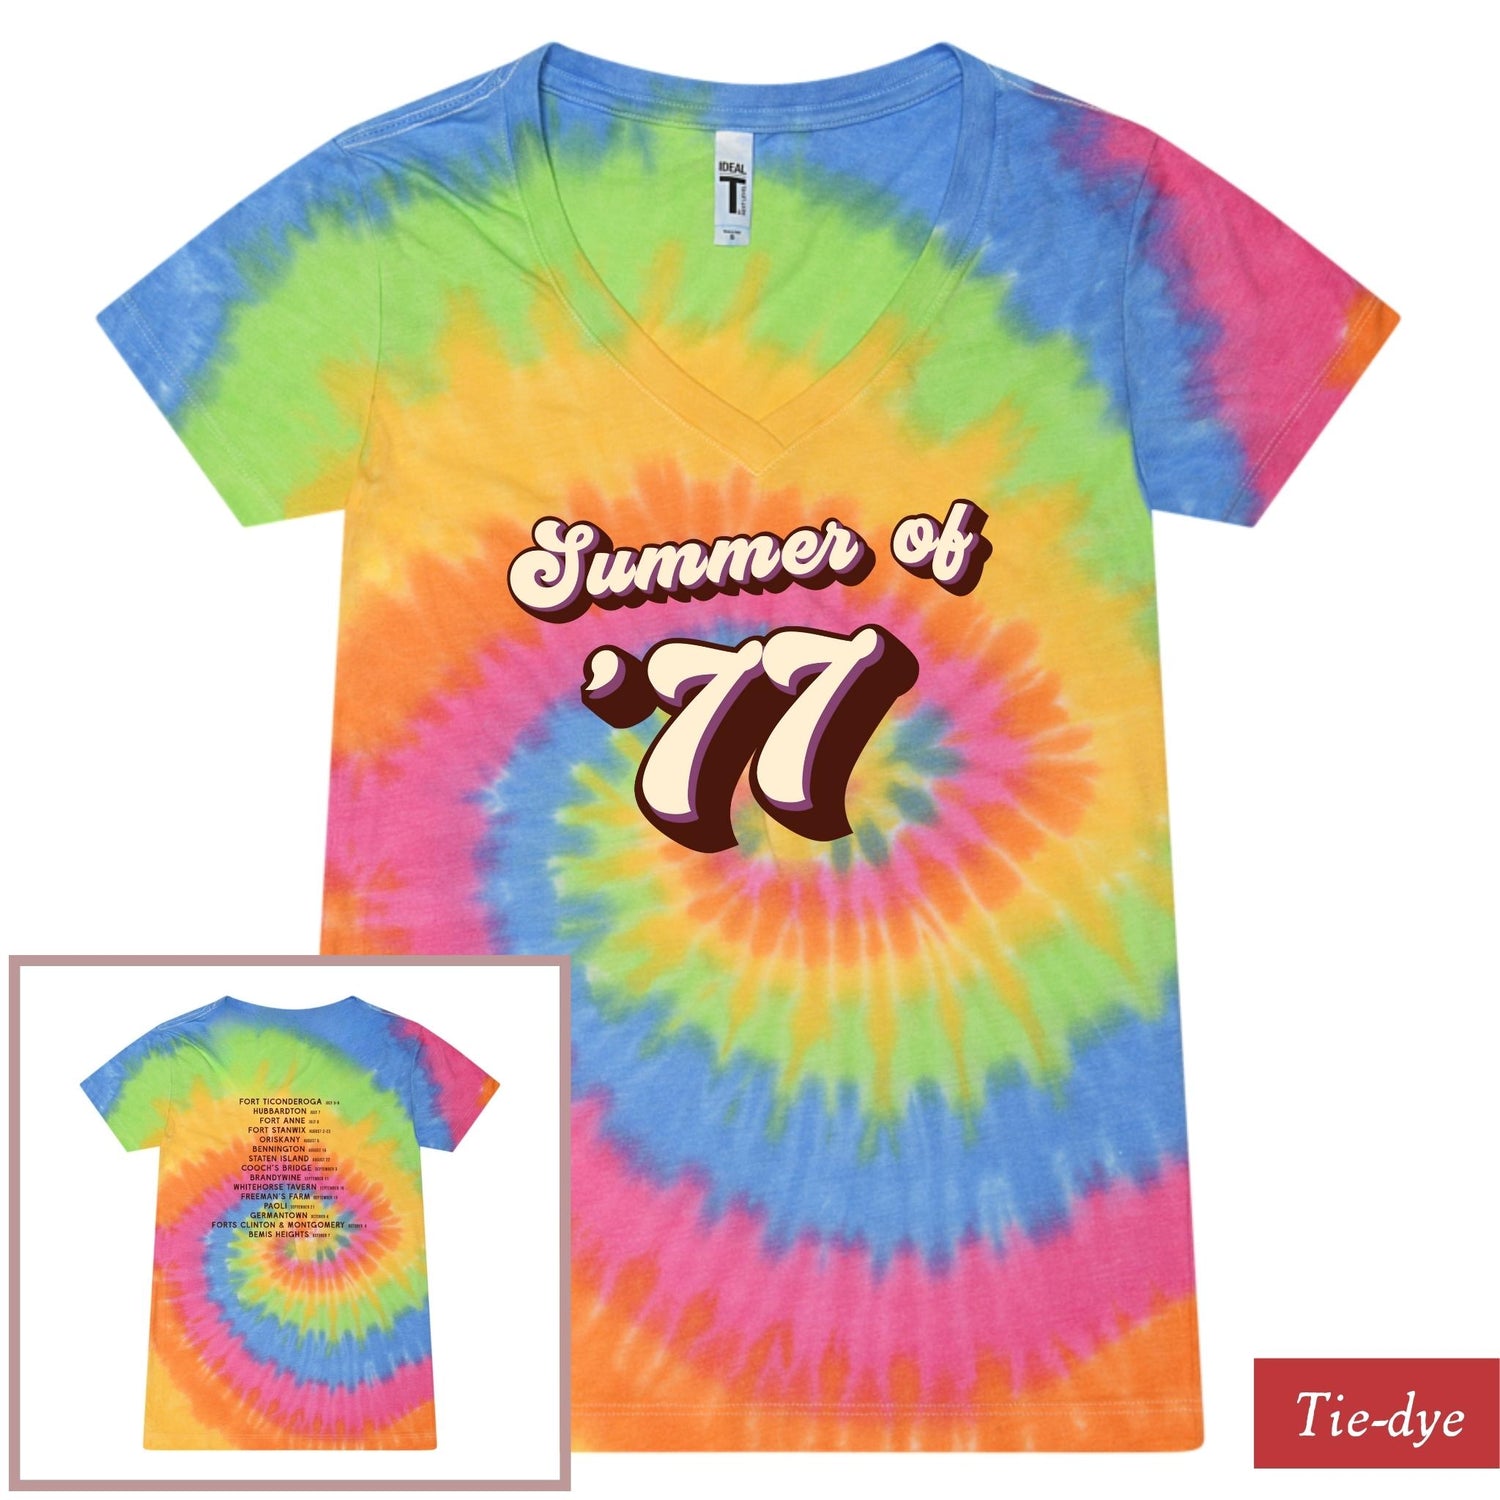 Summer of '77 Limited Edition Shirt